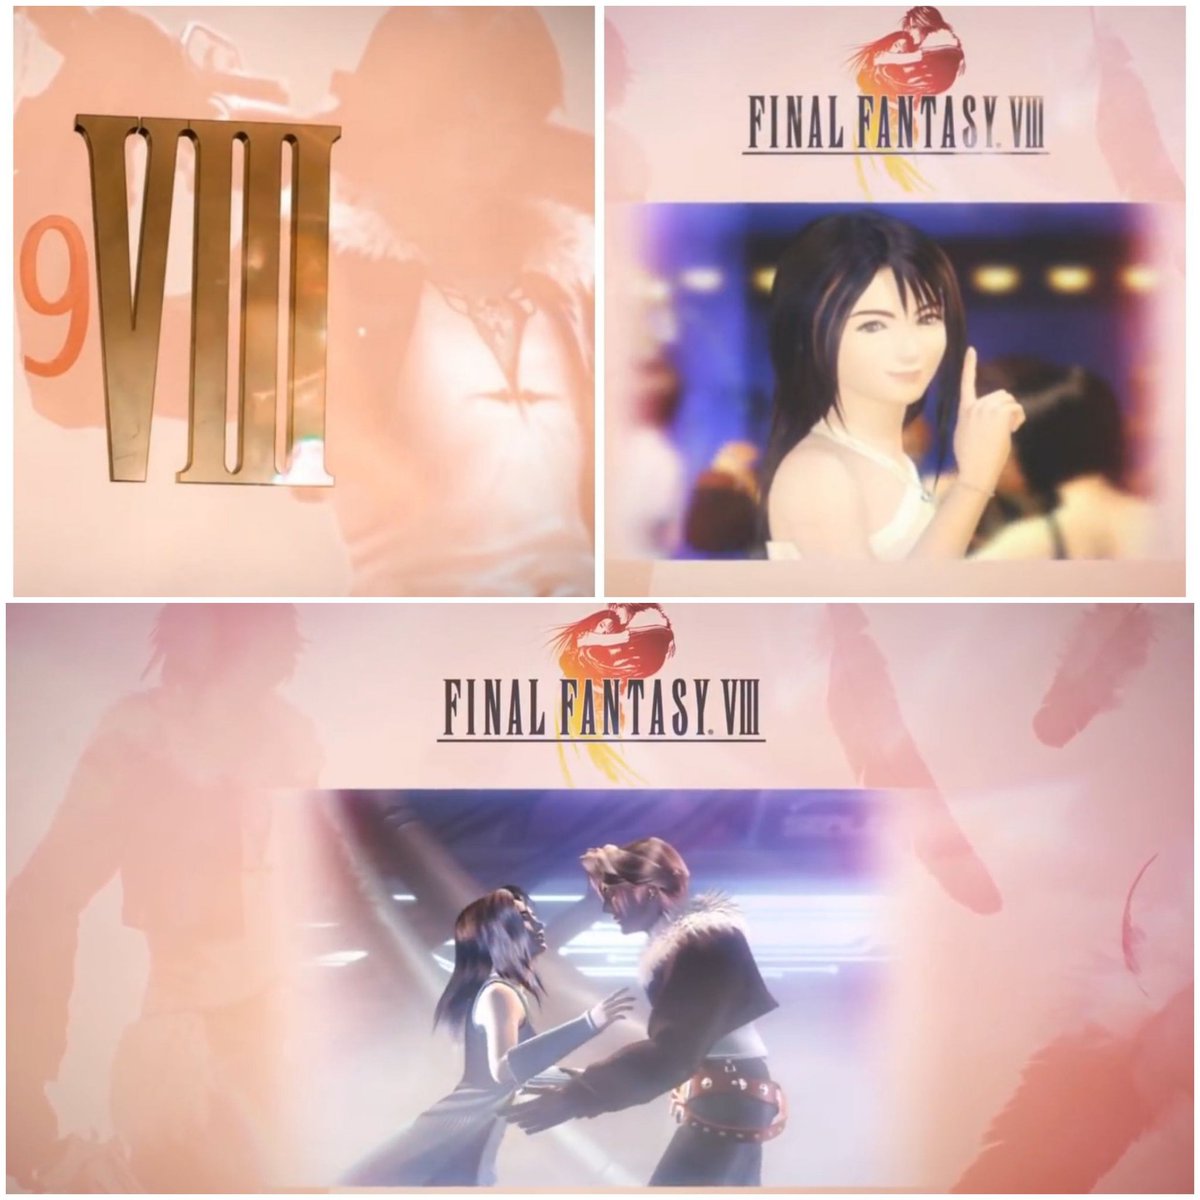 People really be surprised that FF7R's plot revolves heavily around Aerith.... even tho SQEX held "Final Fantasy 30th Anniversary Museum Exhibition : Memories of You" back in 2018 These 4 pairings were the representatives of their respective titles  #FF7R    #Clerith